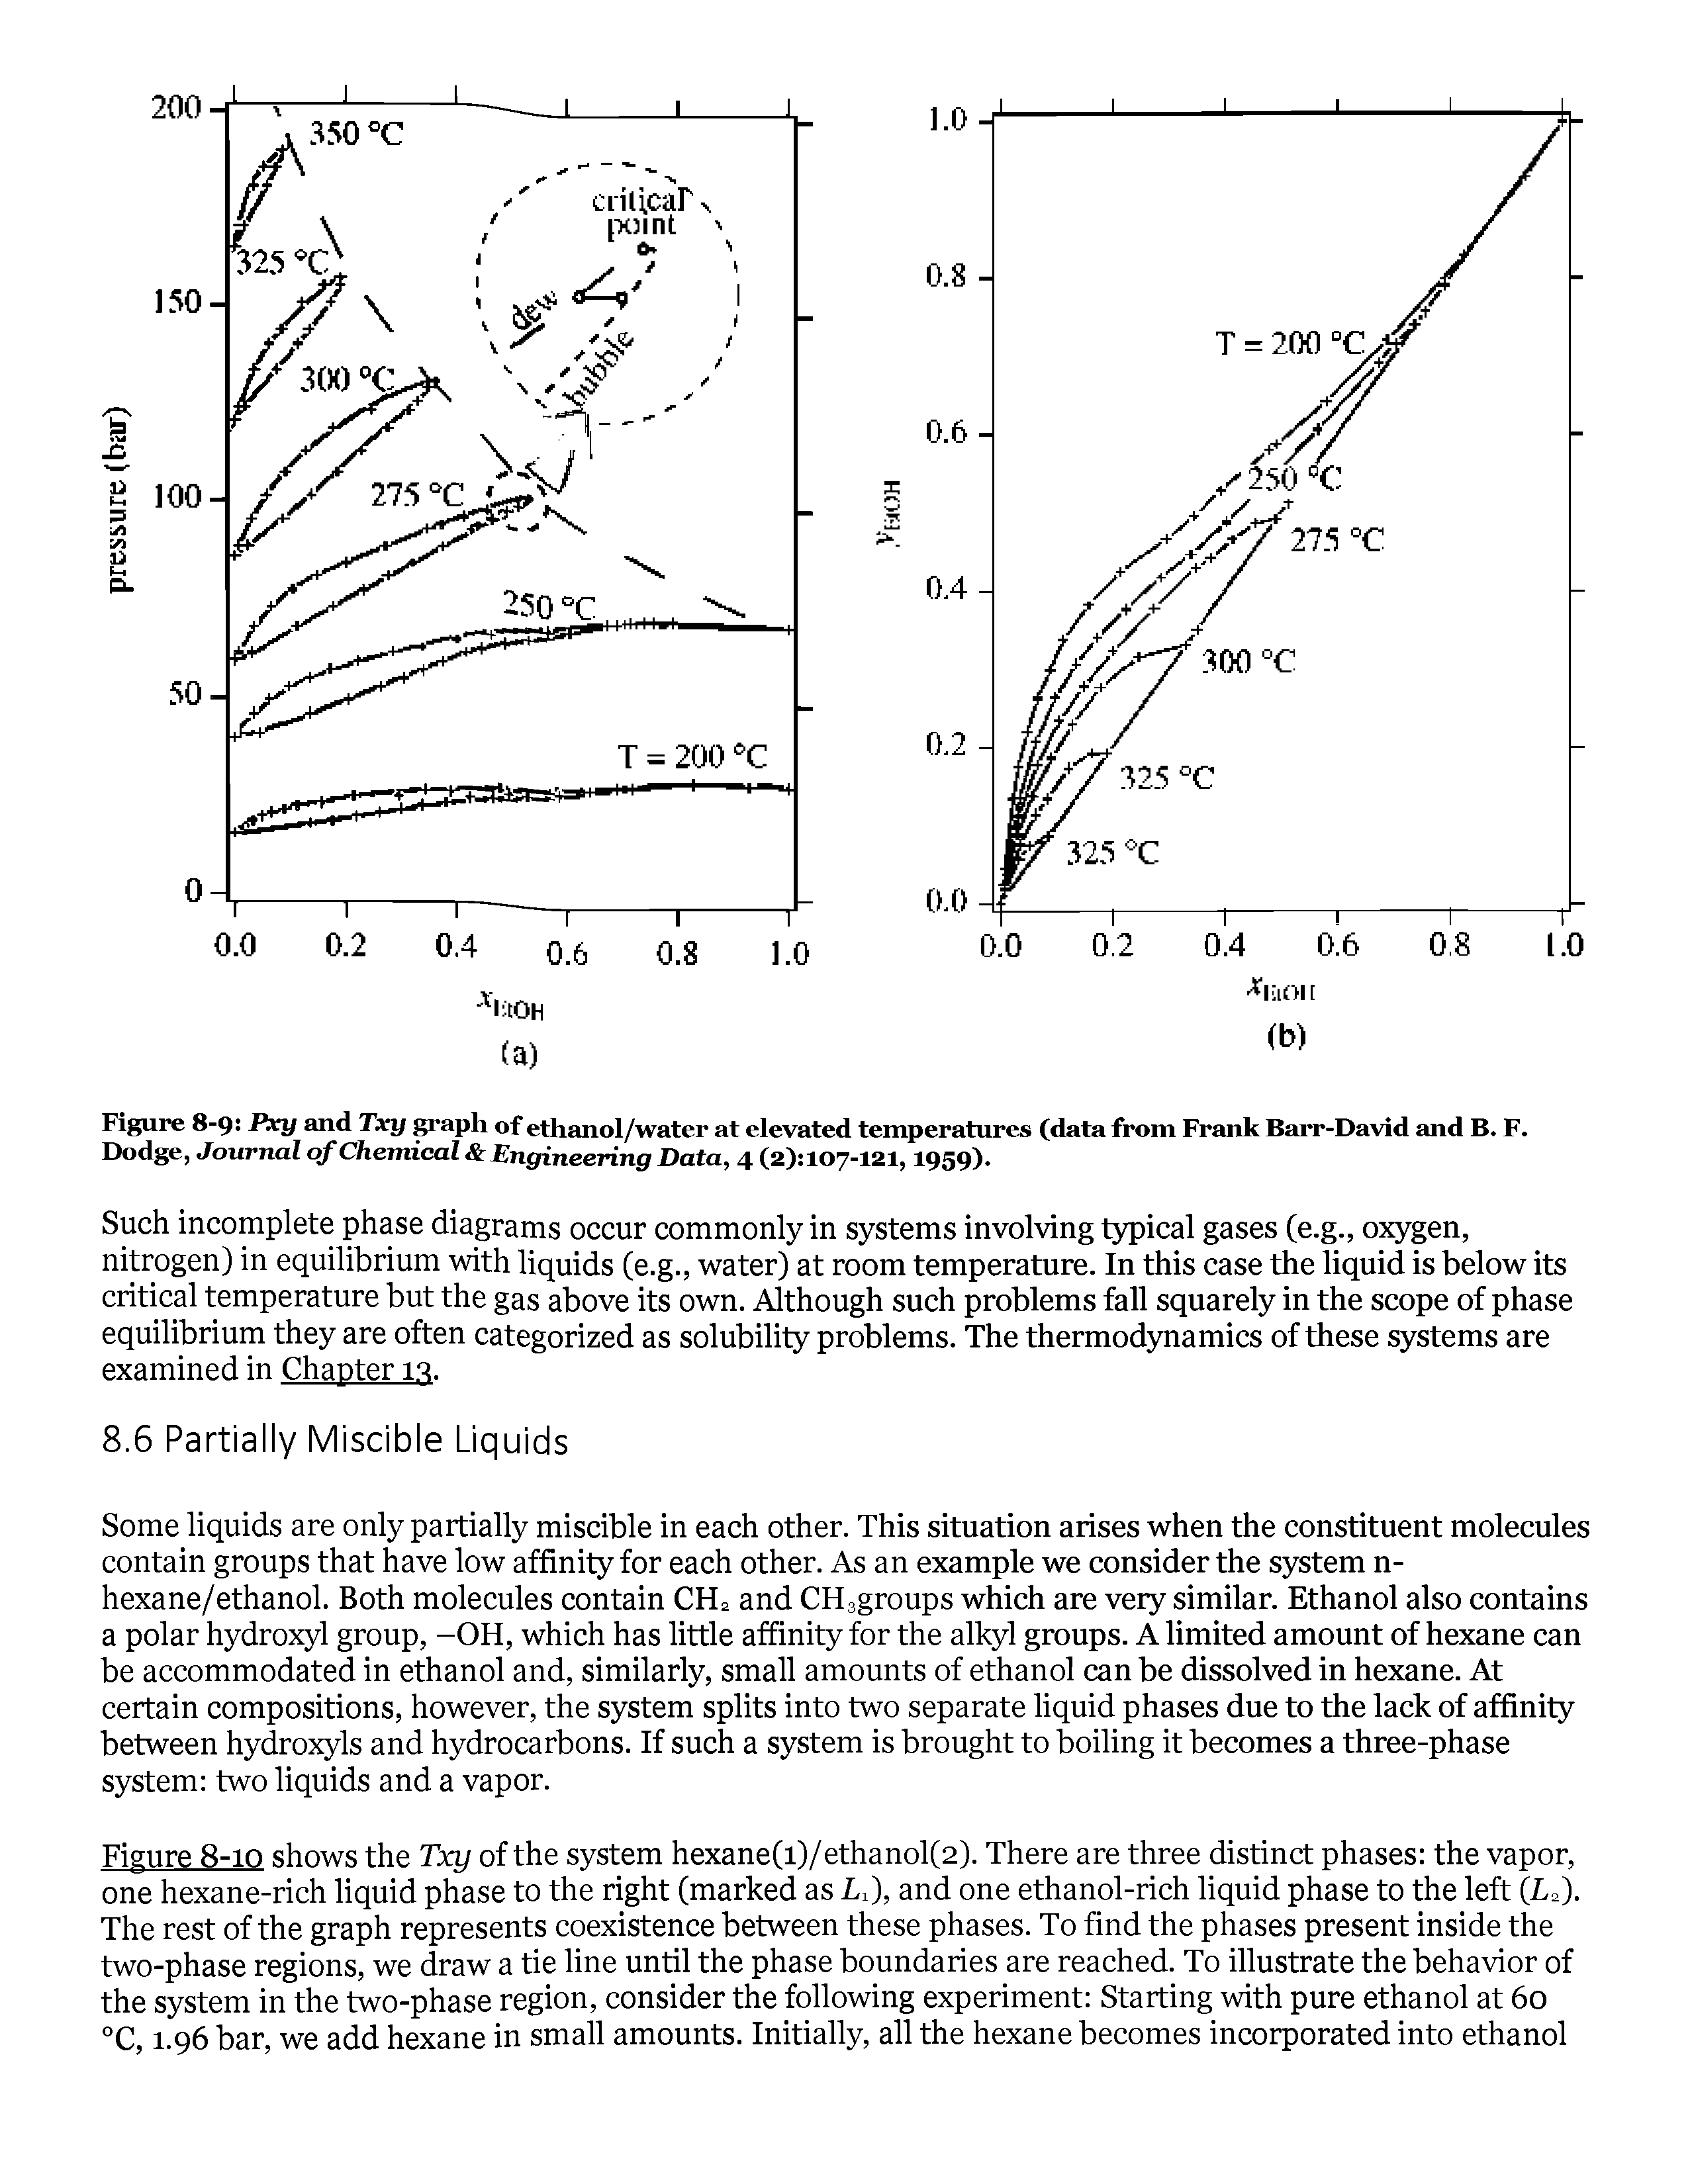 Figure 8-9 Pxy and Txy graph of ethanol/water at elevated temperatures (data from Frank Barr-David and B. F. Dodge, Journal of Chemical Engineering Data, 4 (2) 107-121,1959).